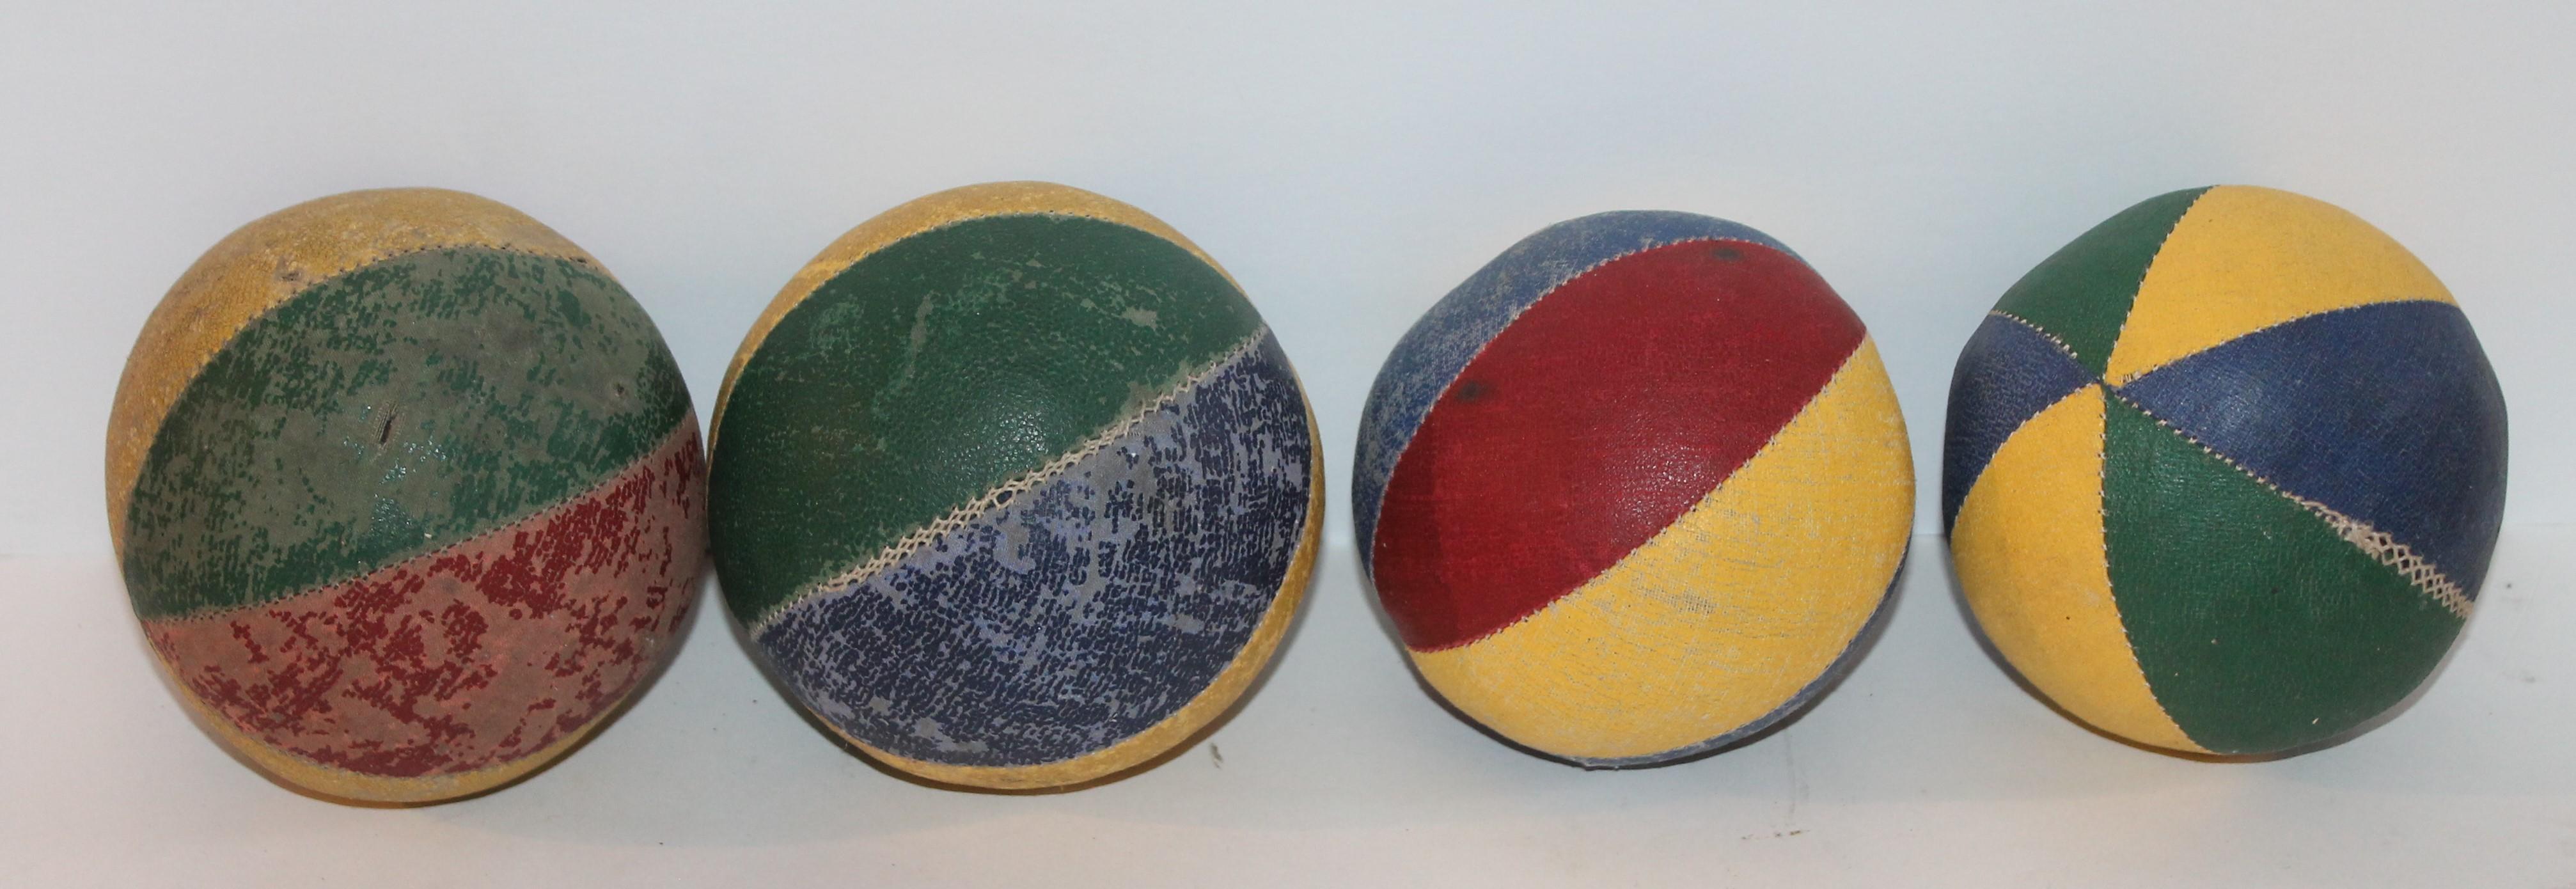 American 19th Century Oil Cloth Juggling or Carnival Balls Collection / 6 Pieces For Sale